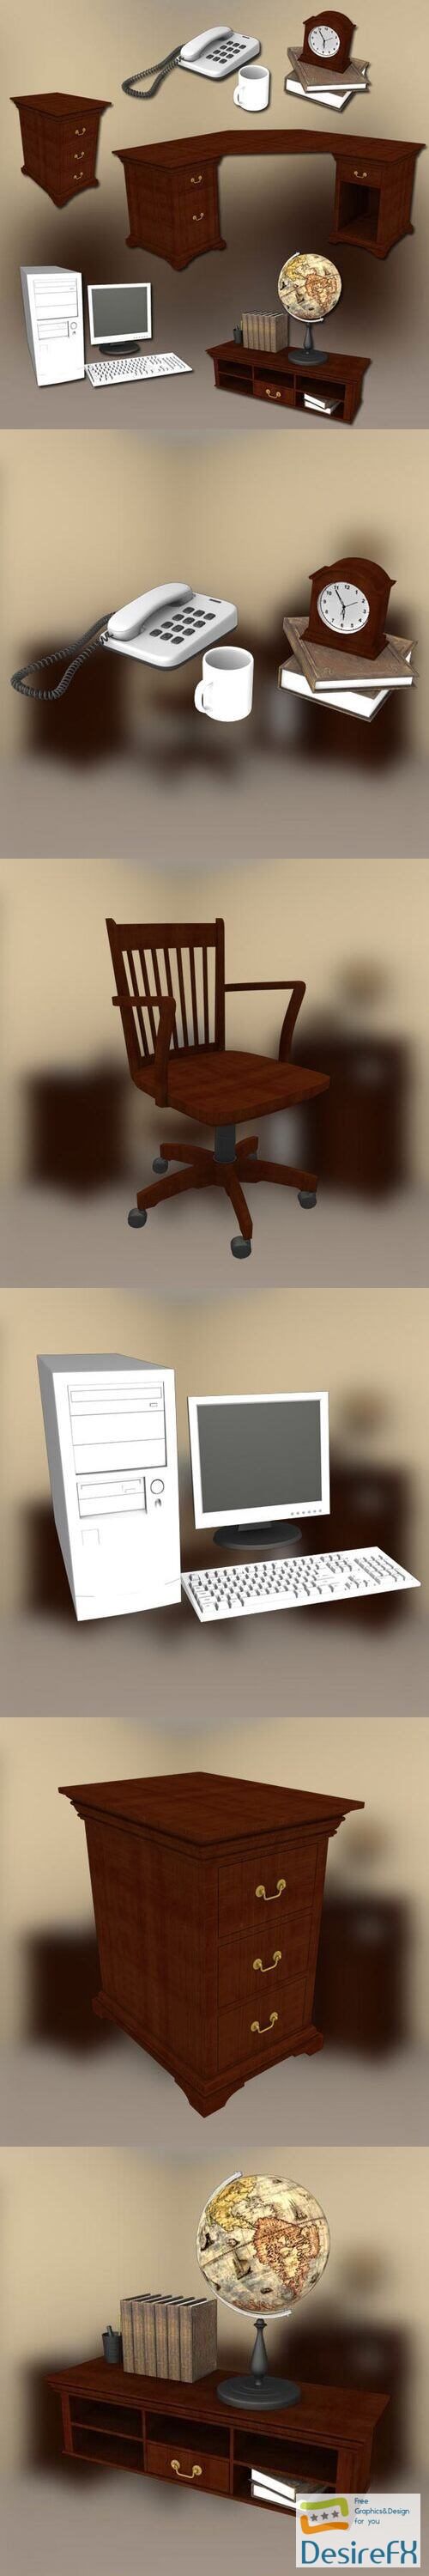 Home WorkPlace 3 Set 3D Model